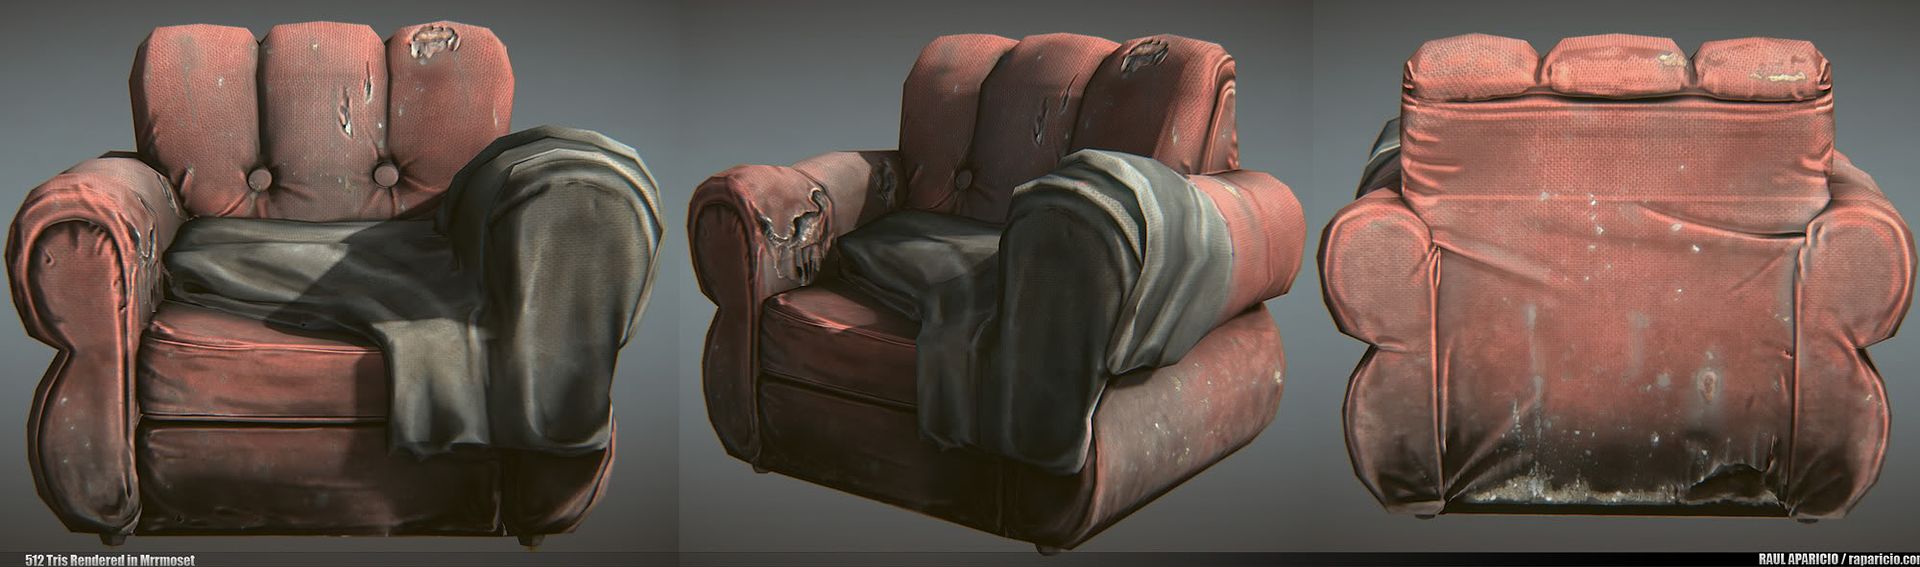 02_showcase_couch_lo_textured-1.jpg